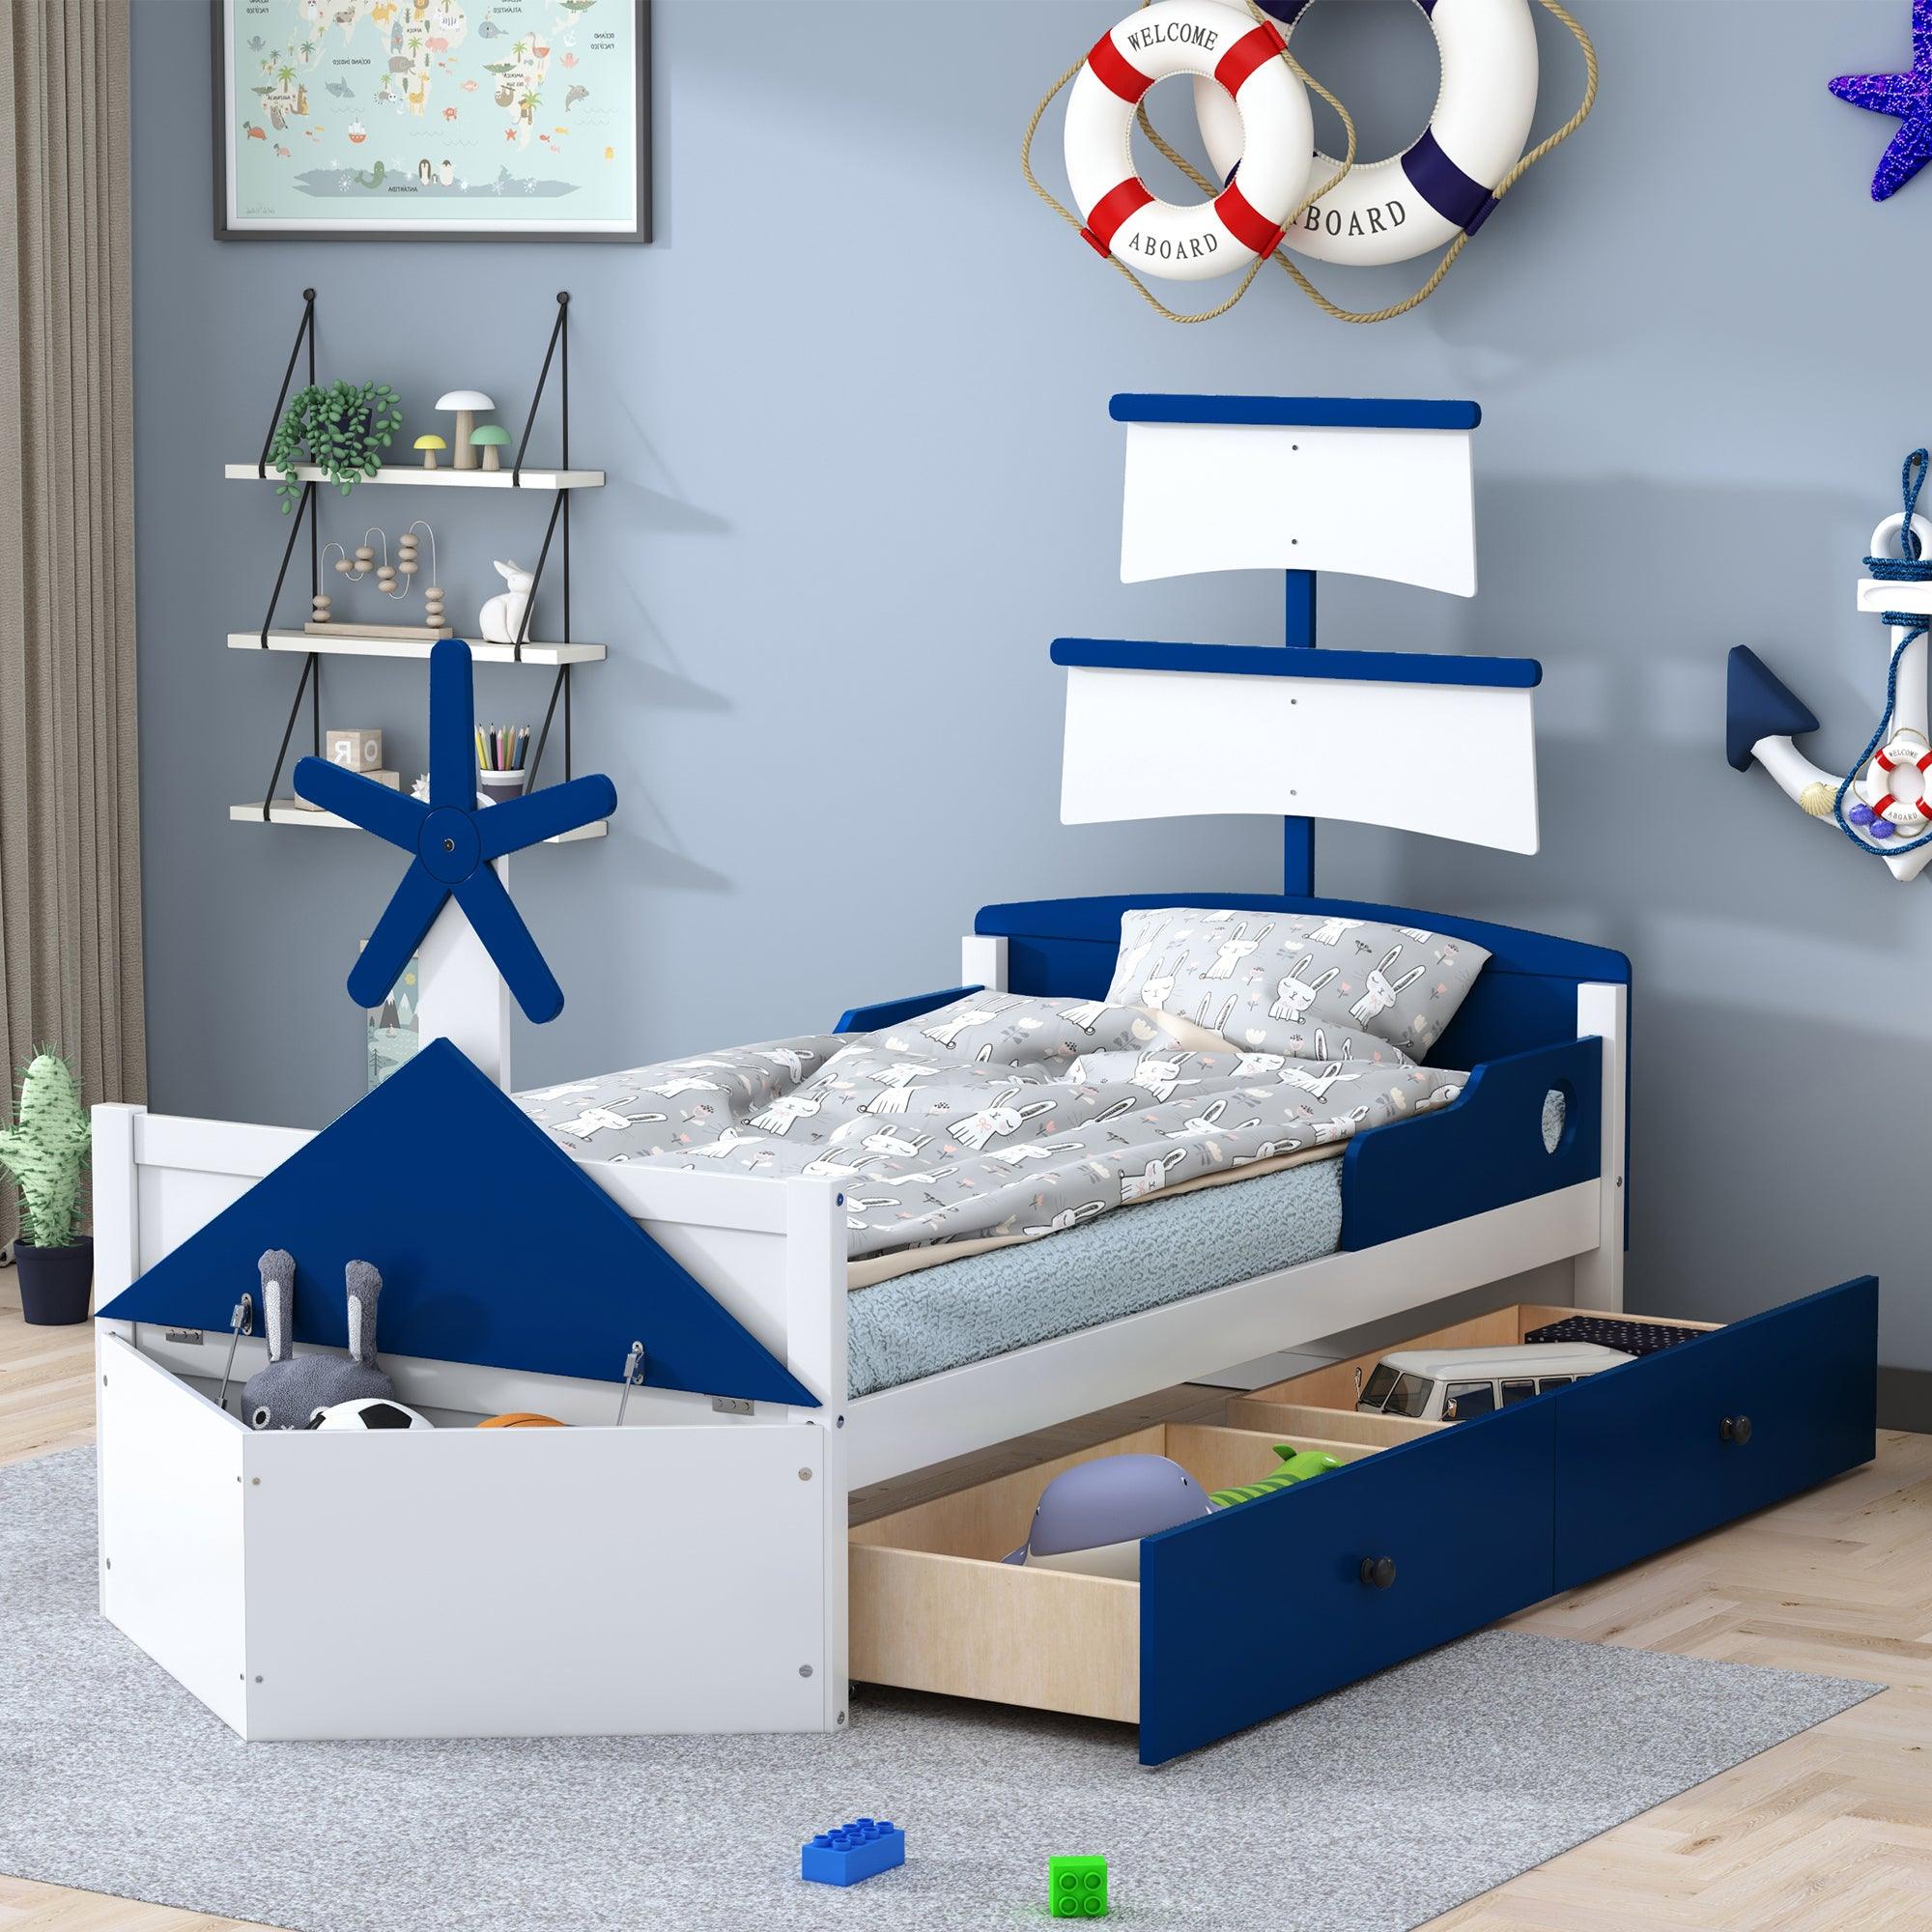 🆓🚛 Twin Size Boat-Shaped Platform Bed With 2 Drawers, Twin Bed With Storage for Bedroom, Blue